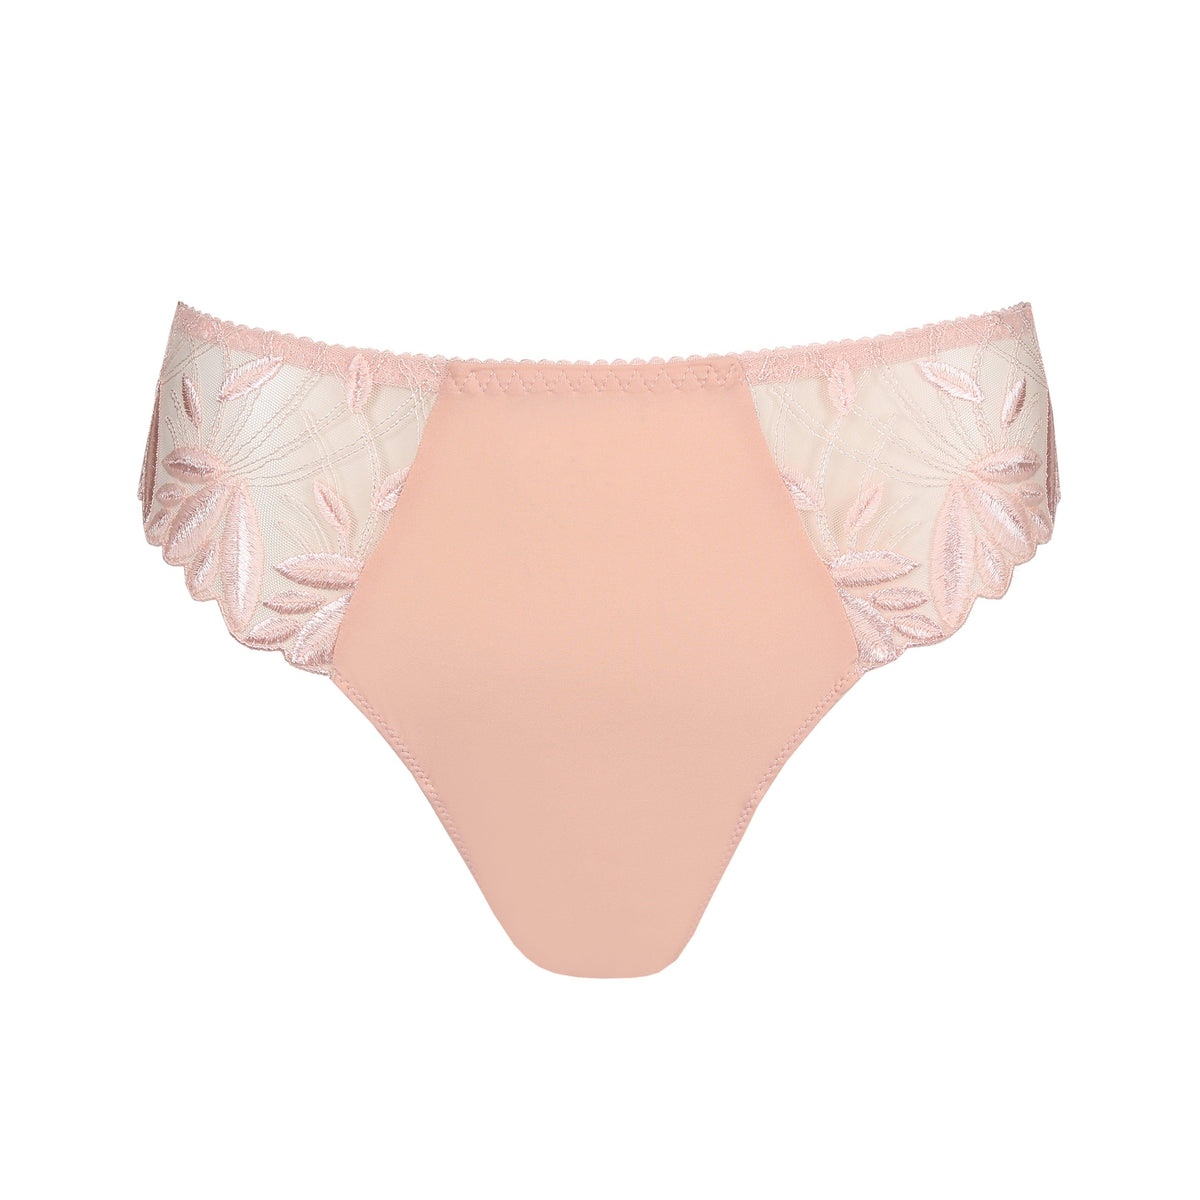 Prima Donna "Orlando" Pearly Pink Thong - Lion's Lair Boutique